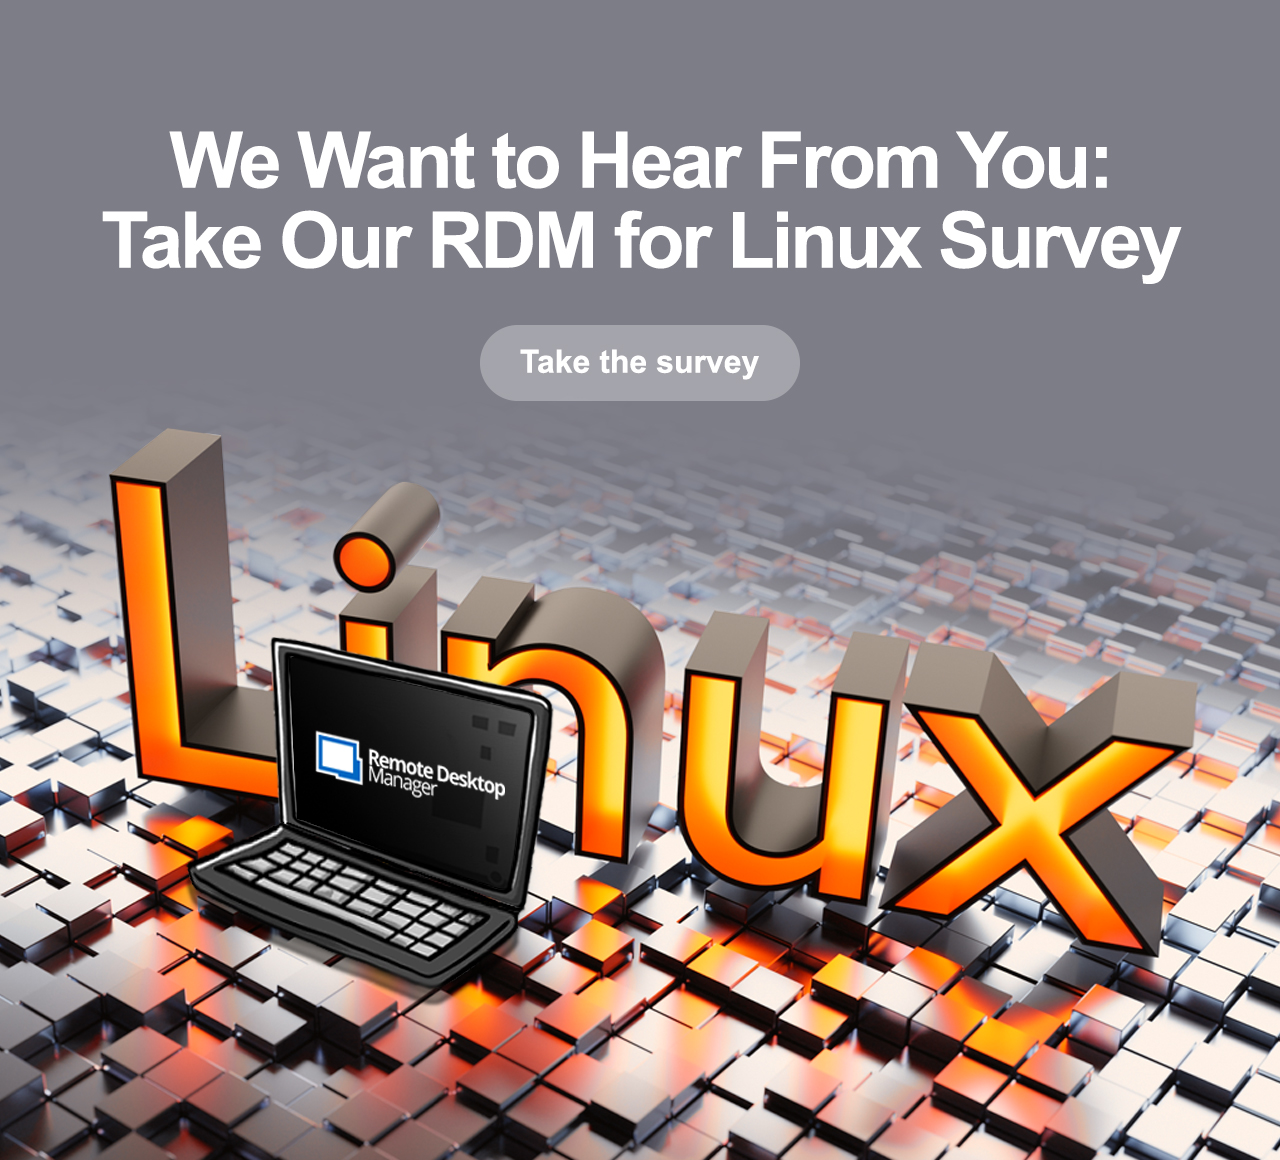 We Want to Hear From You: Take Our RDM for Linux Survey